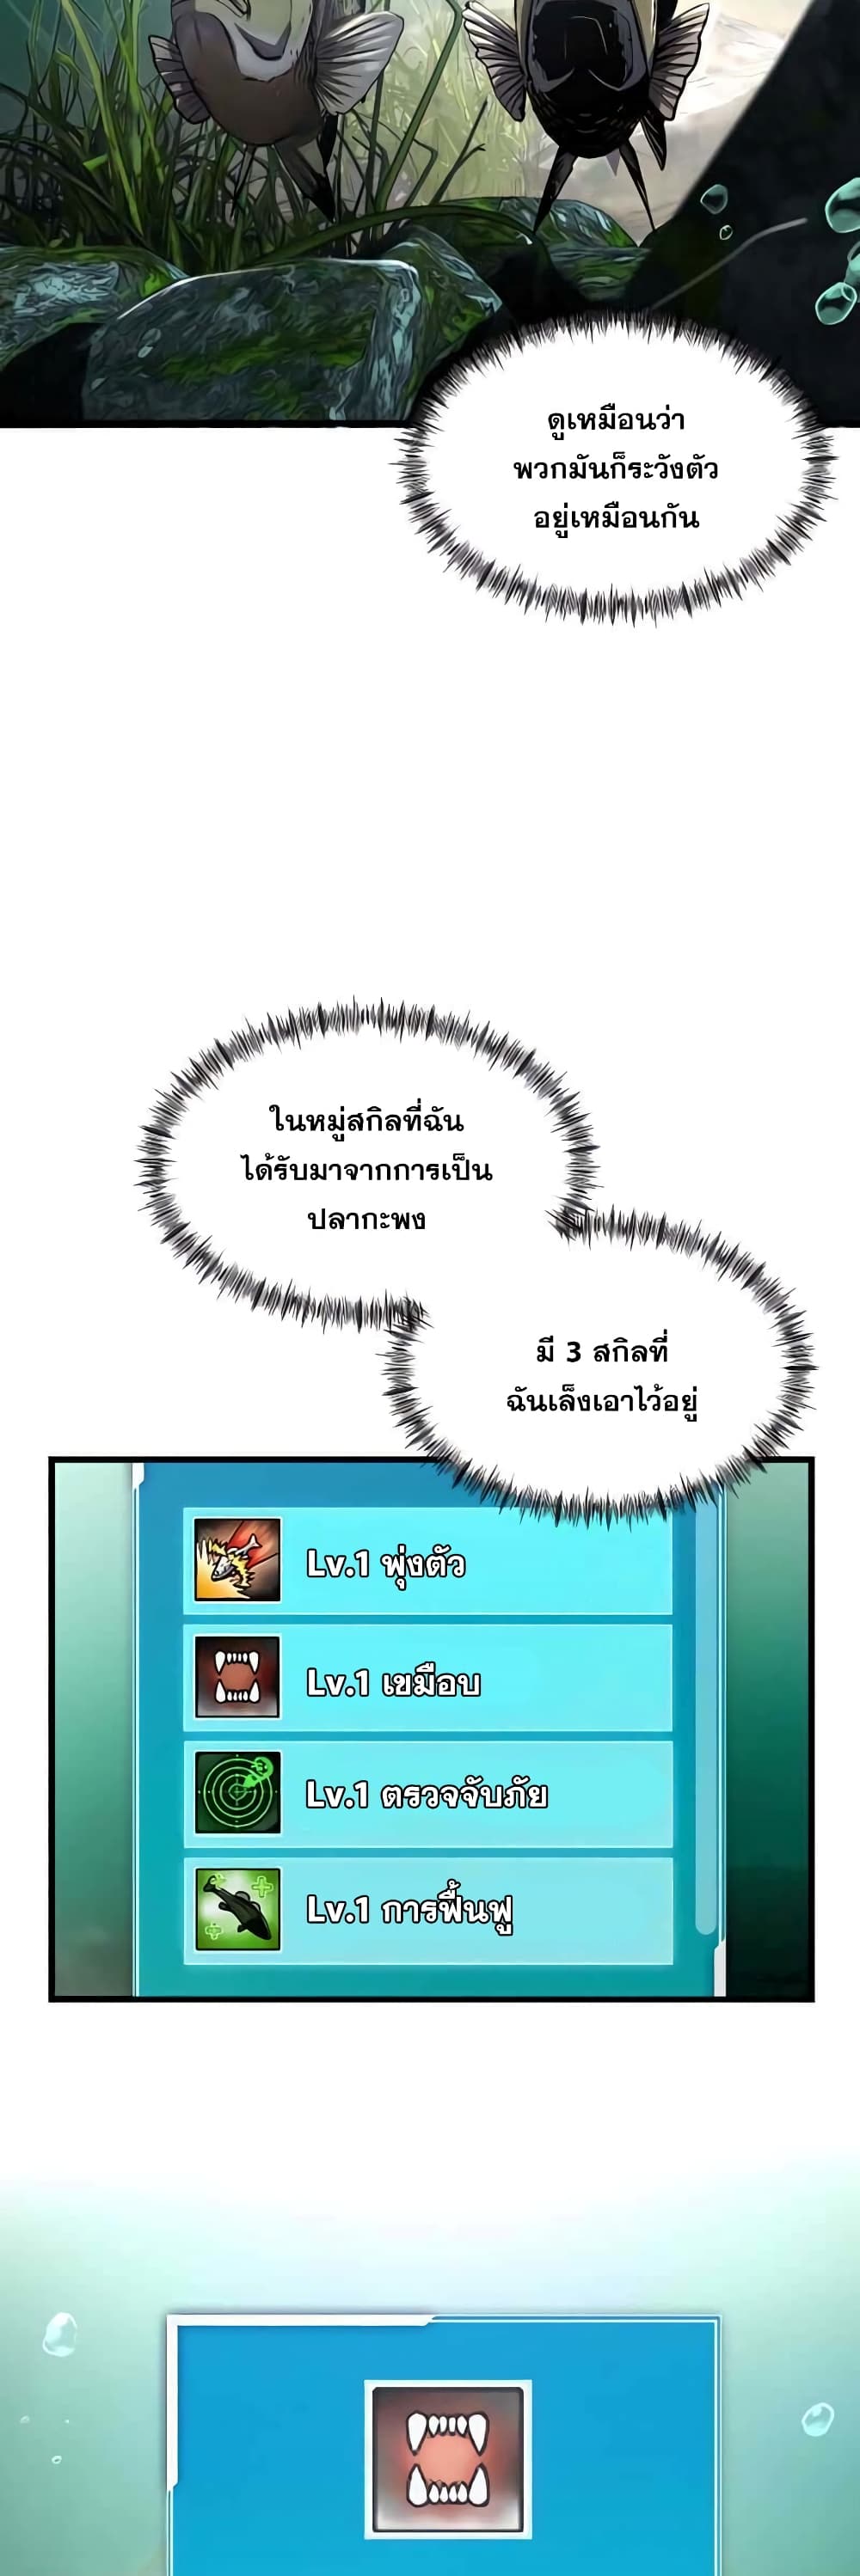 Surviving As a Fish ตอนที่ 3 (28)